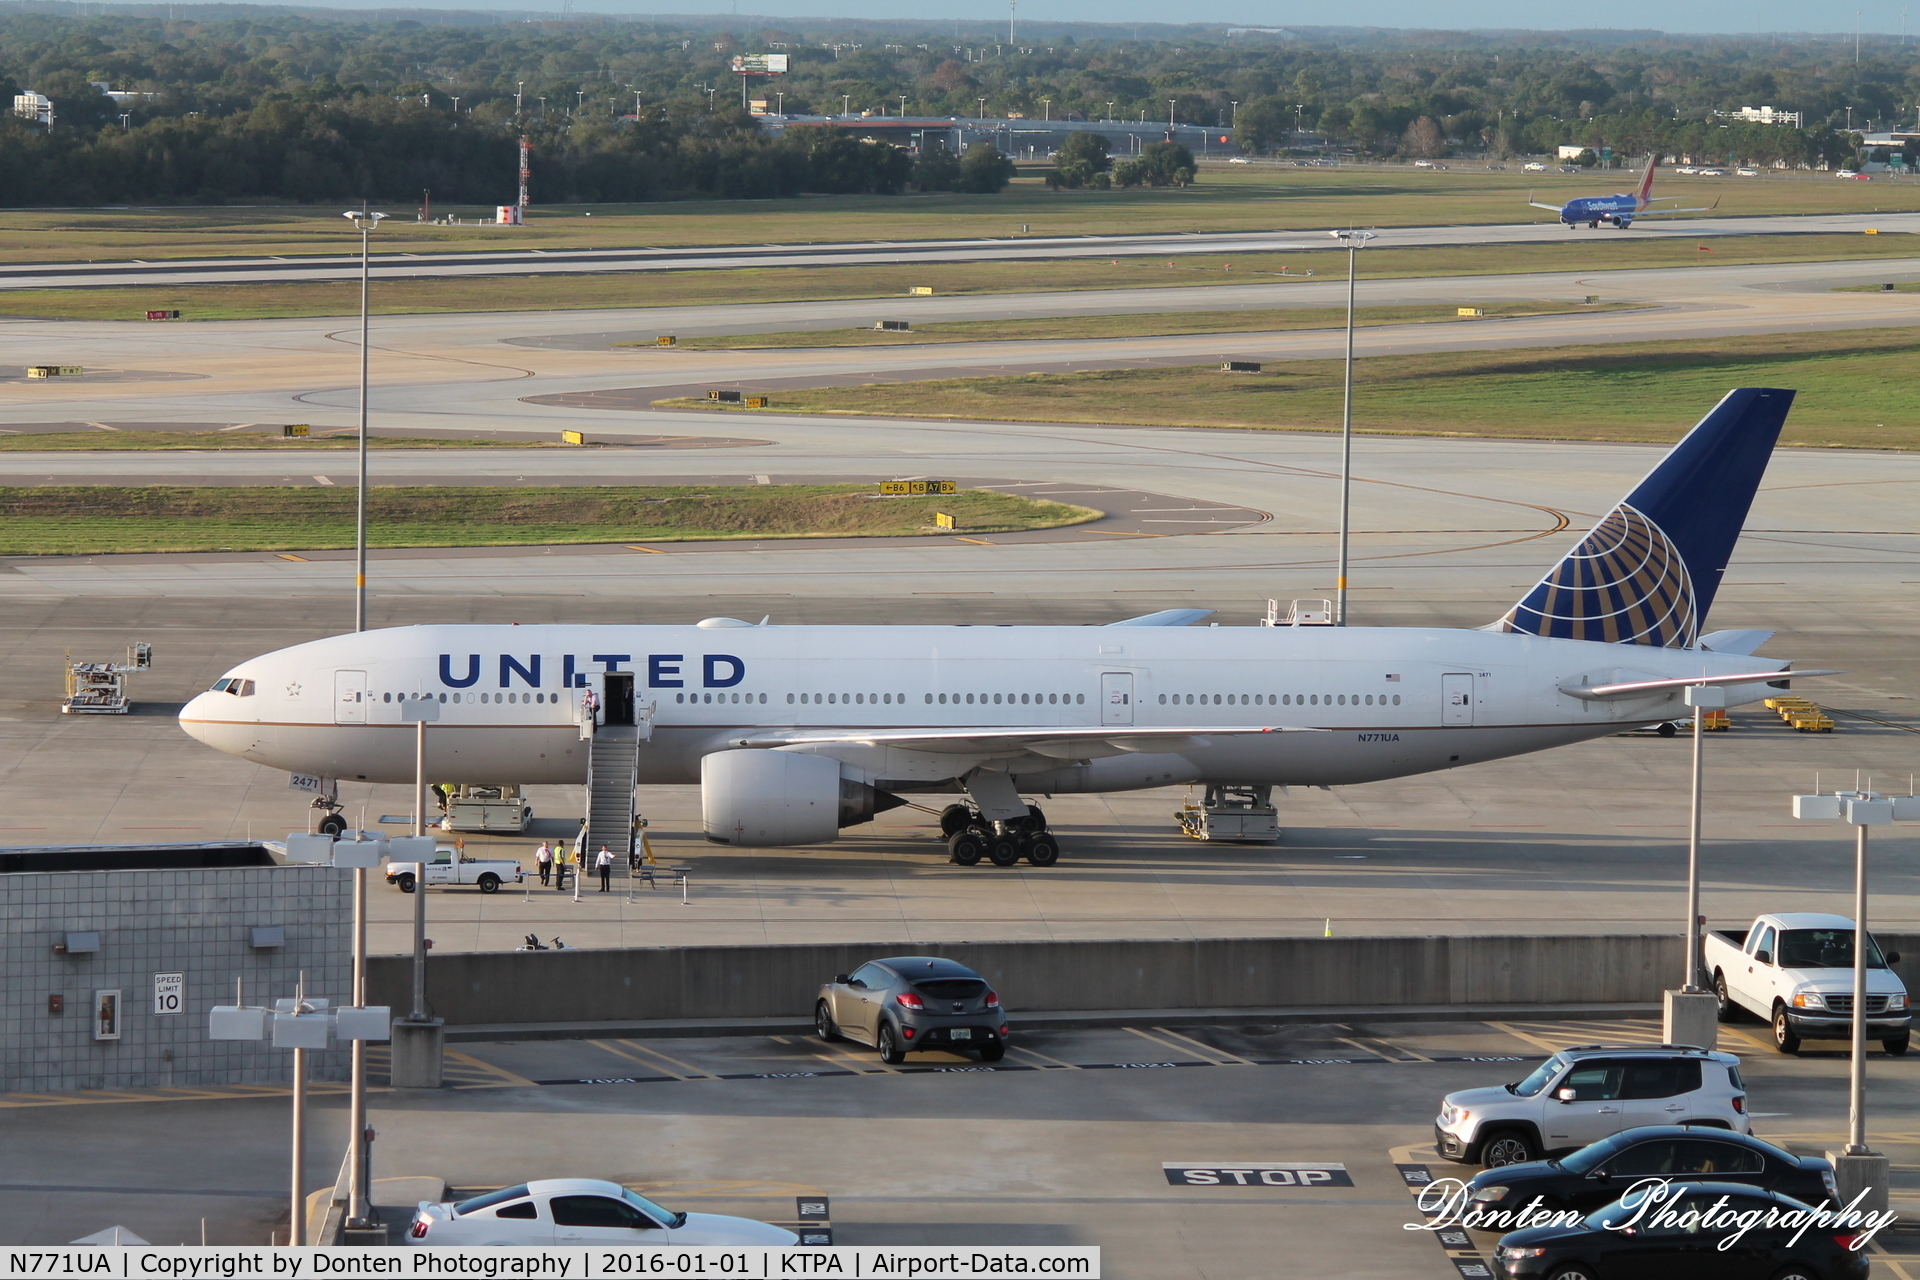 N771UA, 1995 Boeing 777-222 C/N 26932, United Flight 2223 (N771UA) sits on the ramp at Tampa International Airport providing charter service for Northwestern University following the Outback Bowl